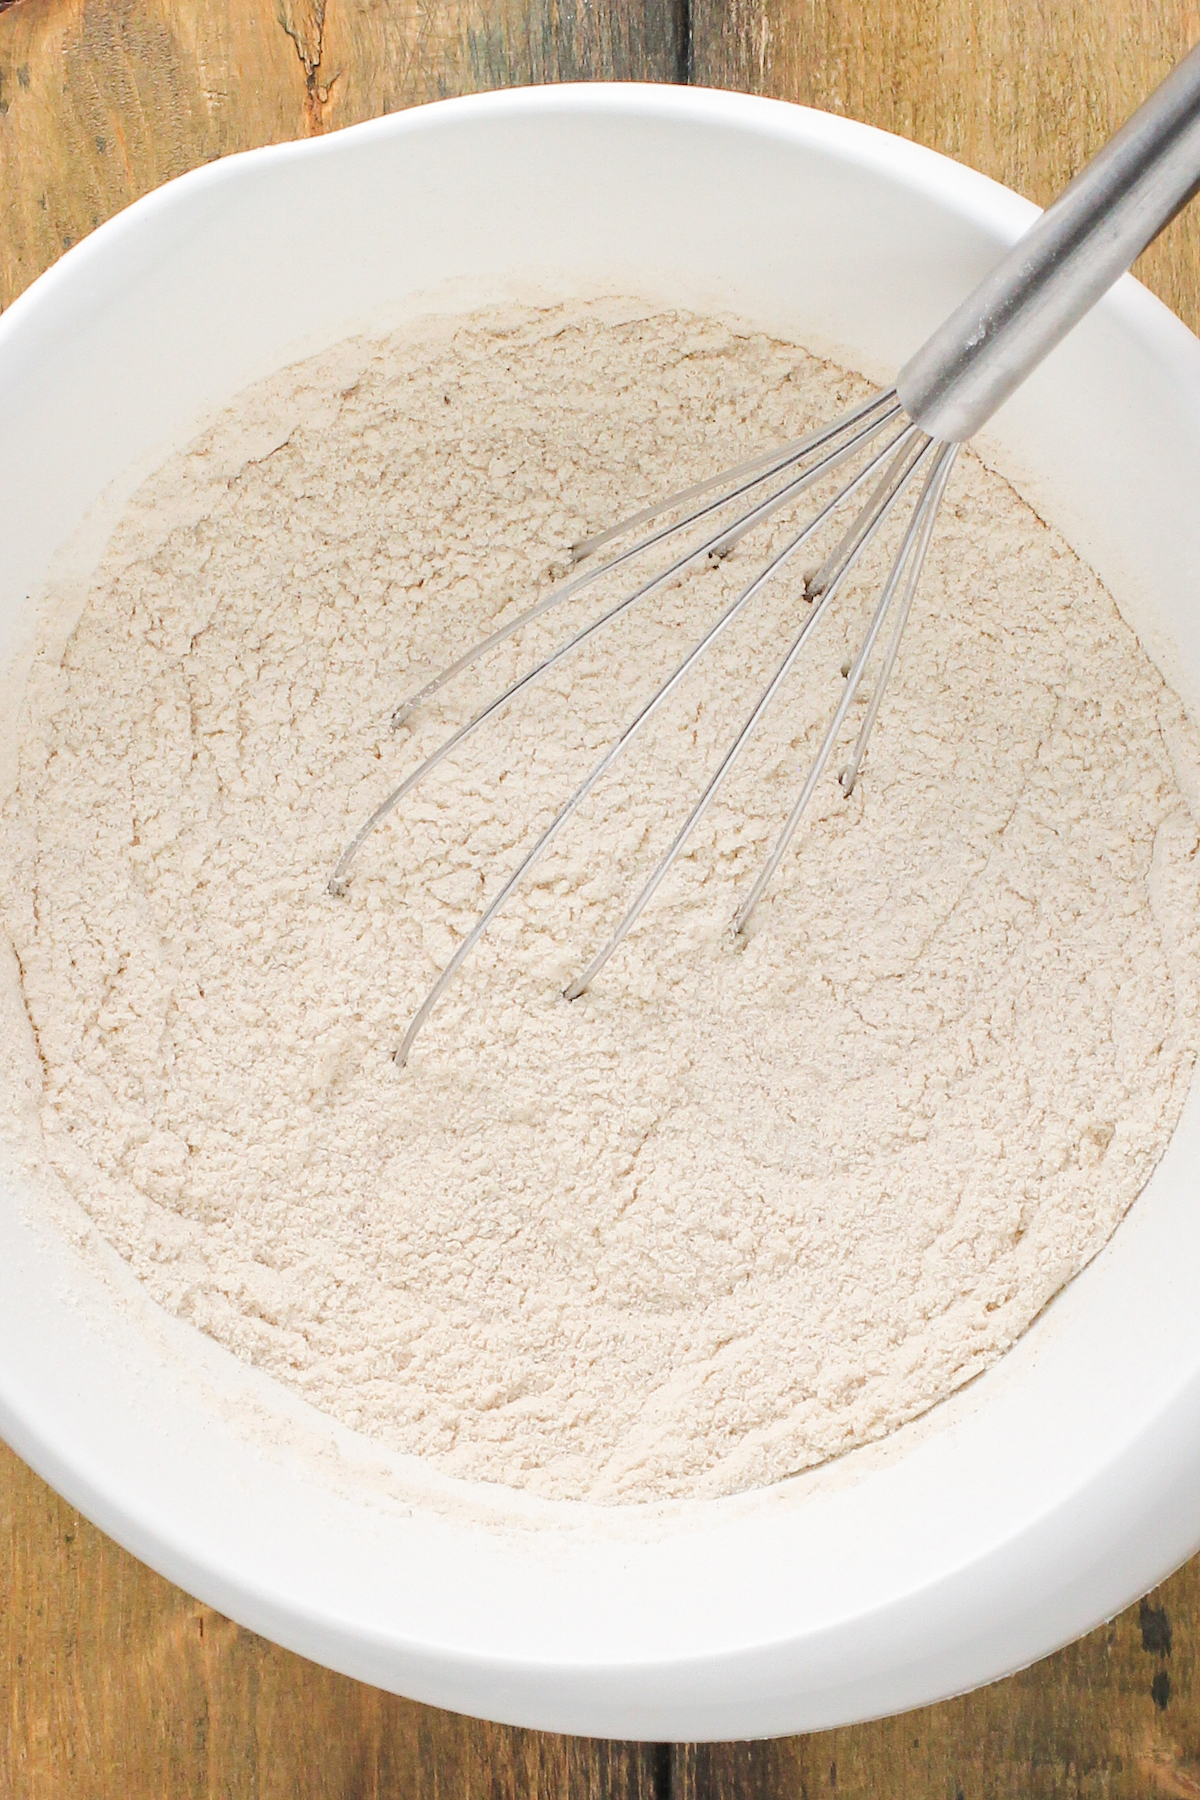 Dry ingredients in a mixing bowl with a whisk.